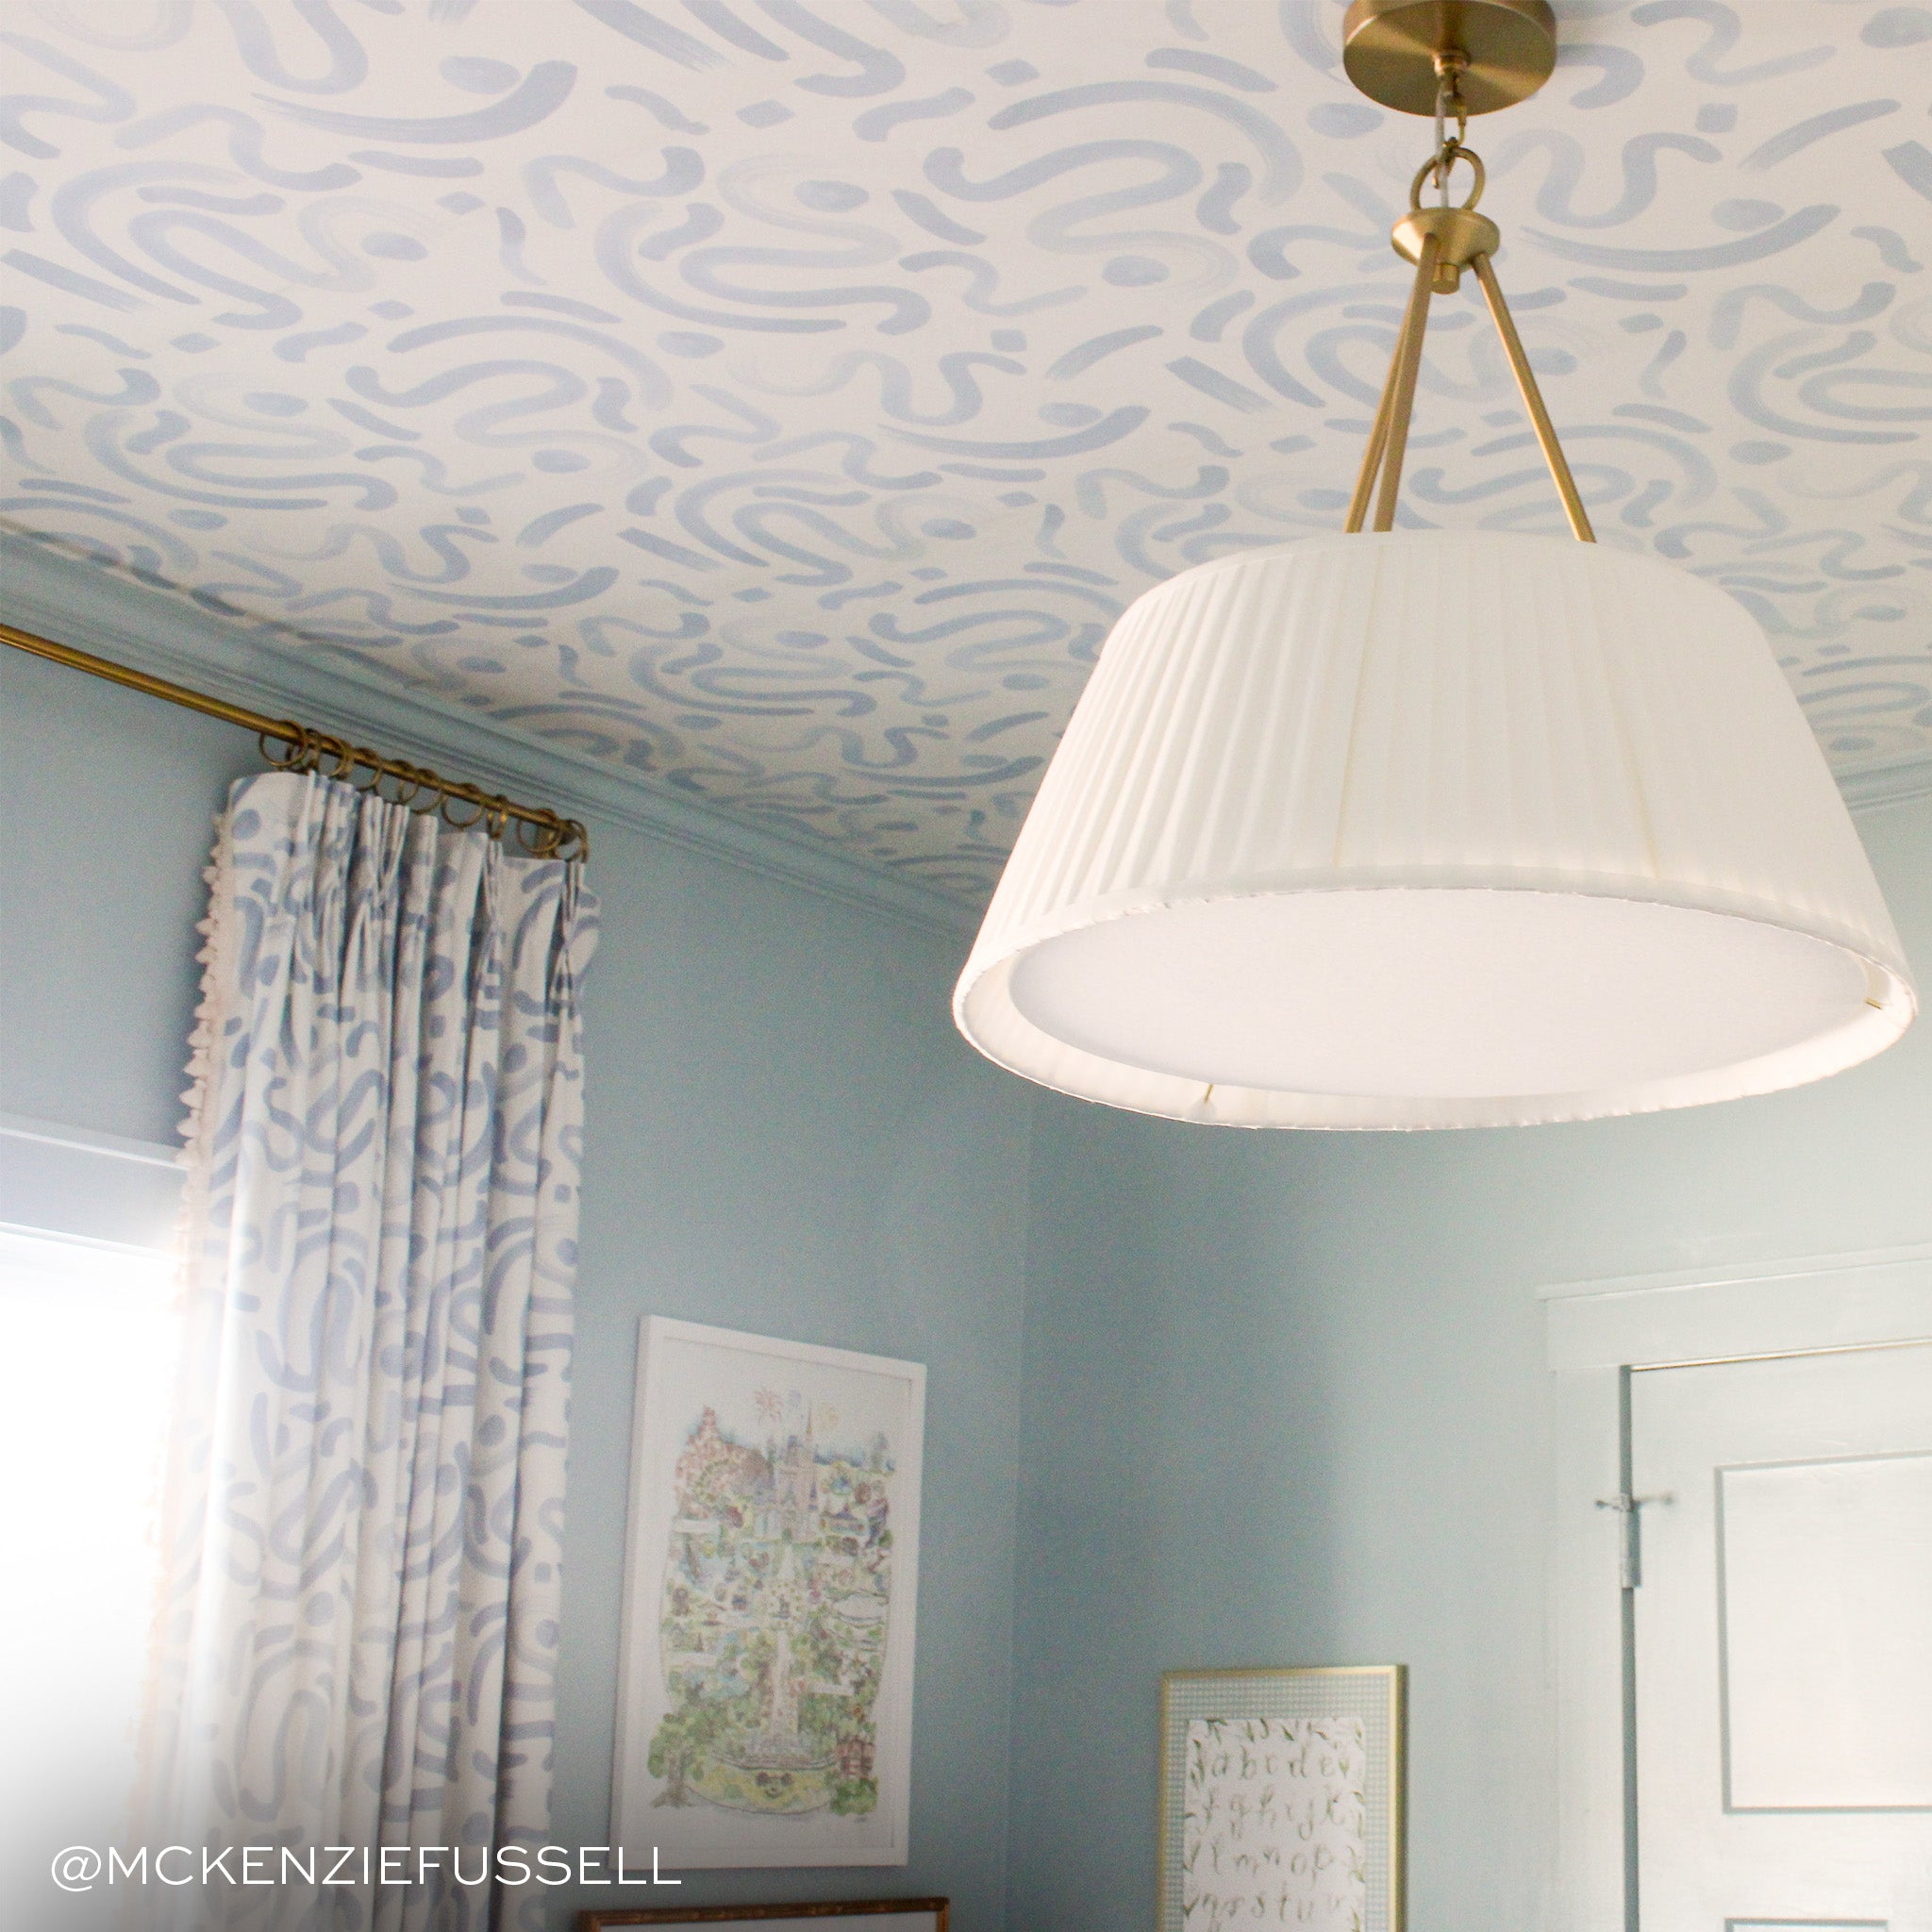 sky blue abstract wallpaper on the ceiling with light blue painted walls and a white and gold light fixture